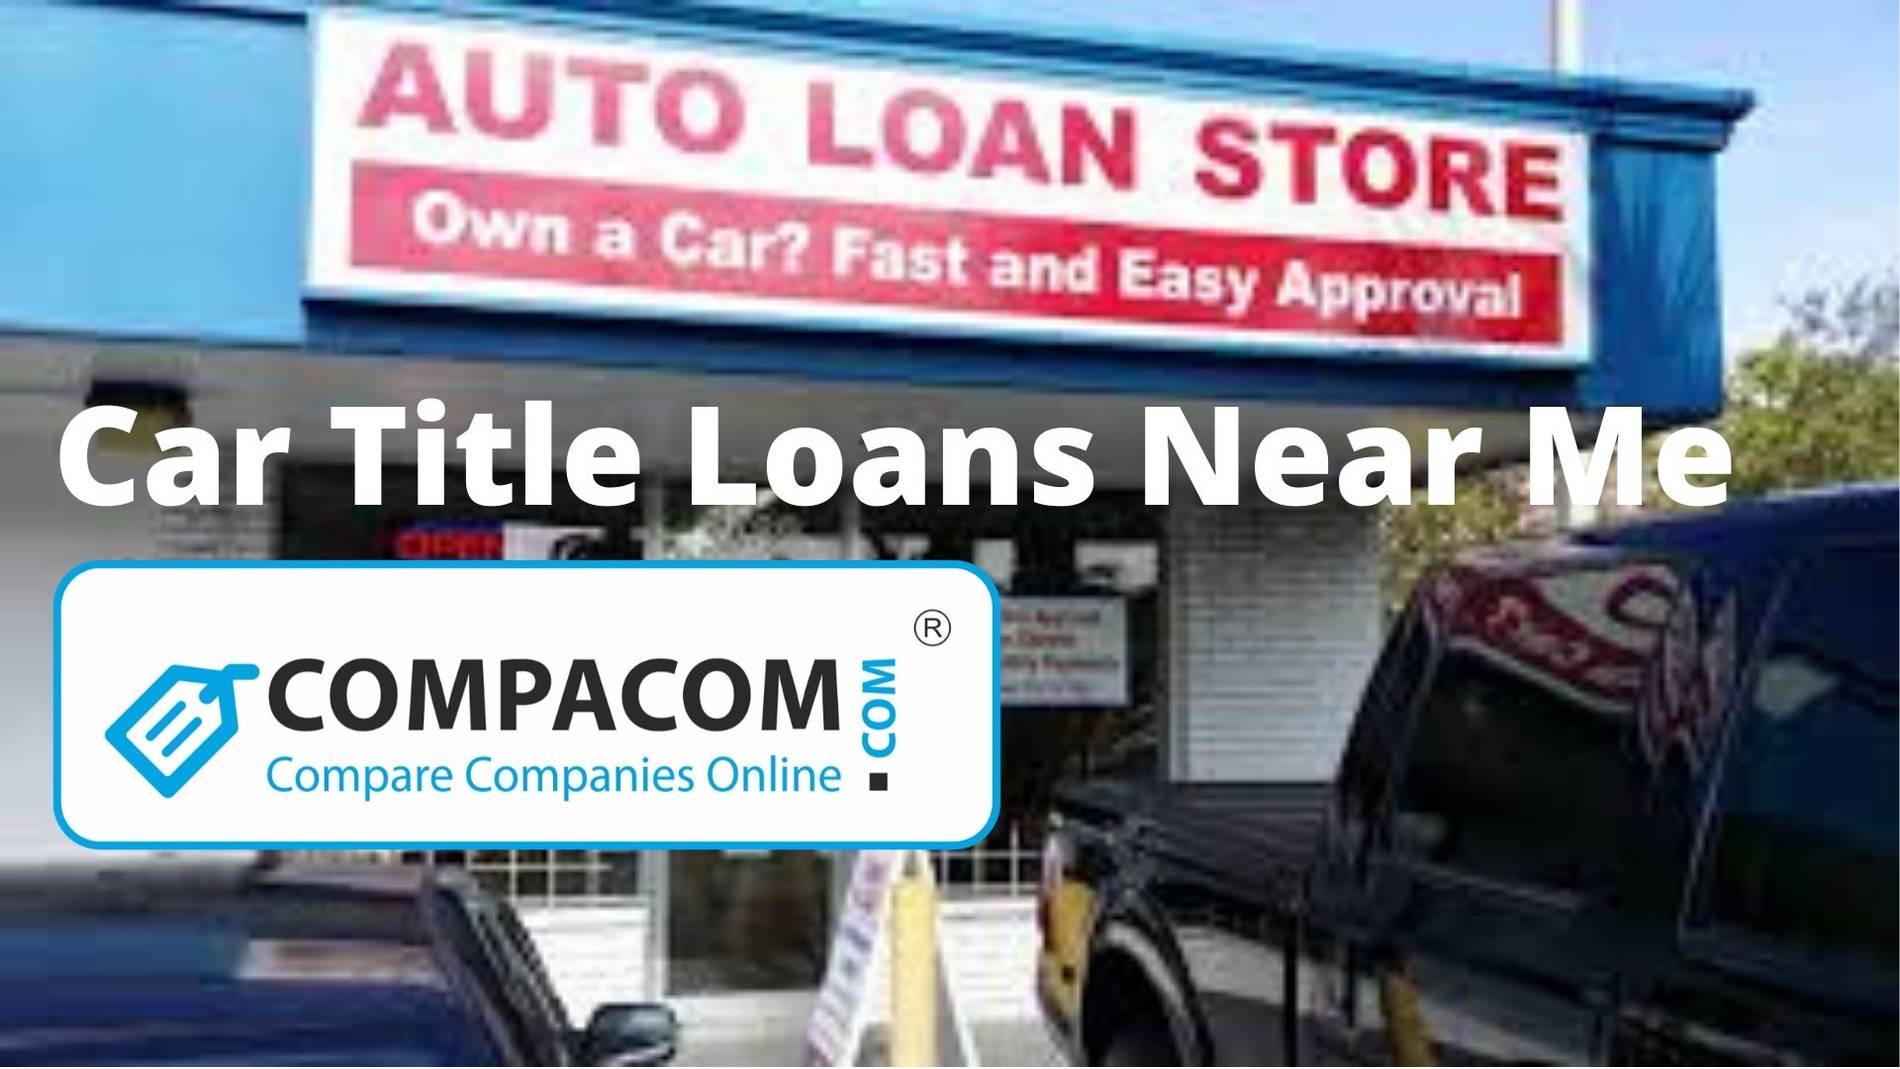 Get PDF and Download - Personal Auto Loans Near Me